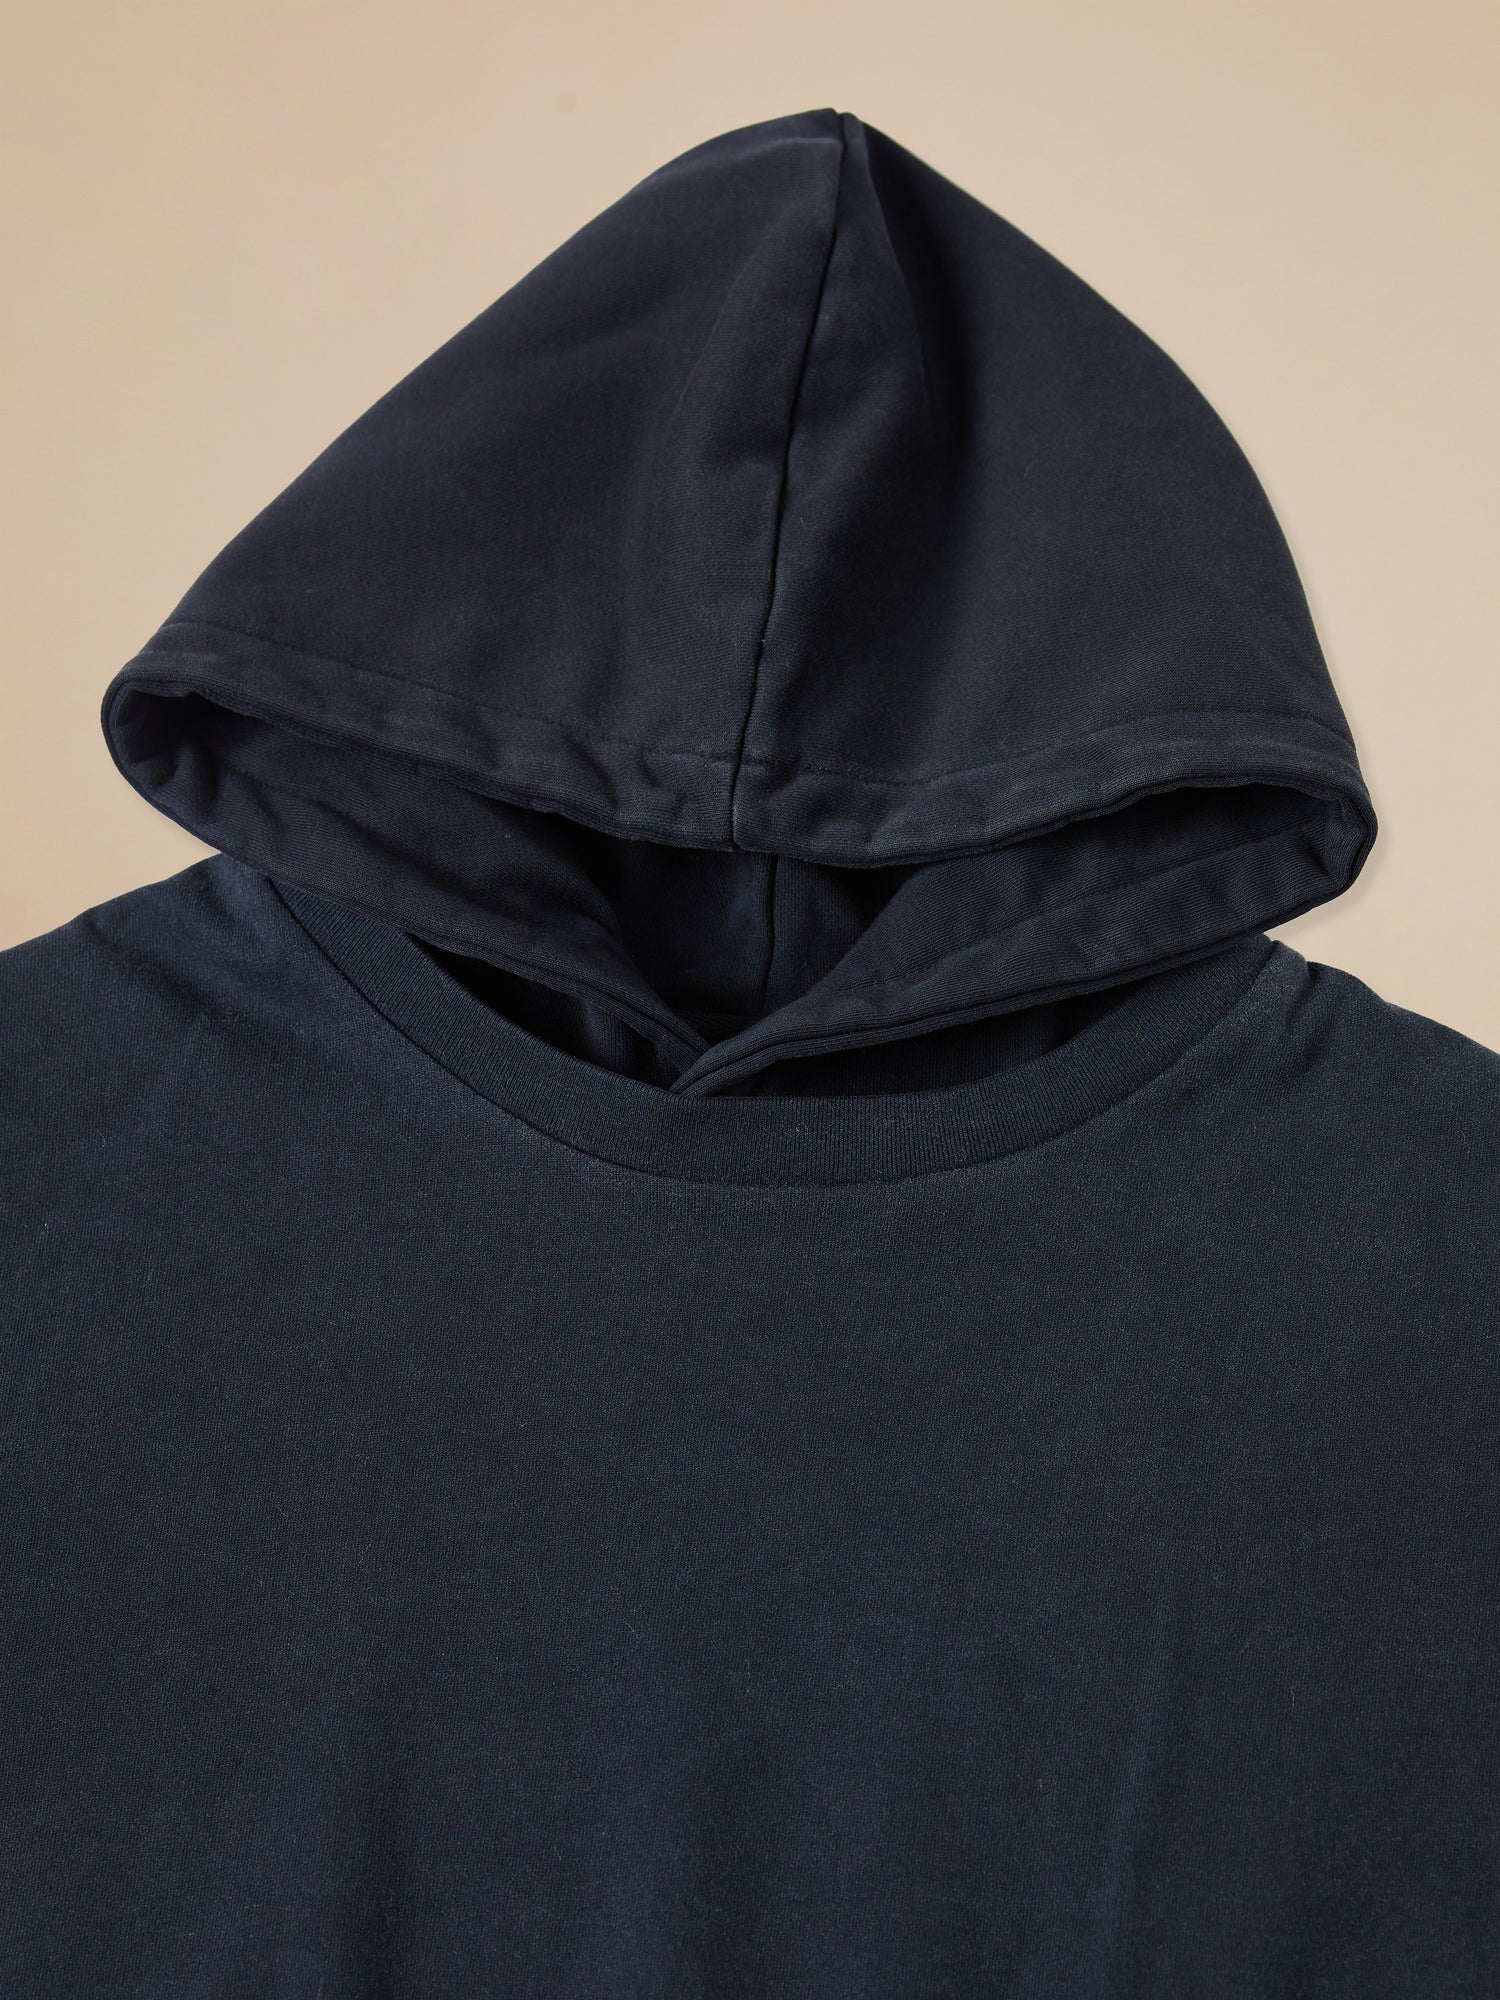 A Found Double Layer Hoodie with a hood.